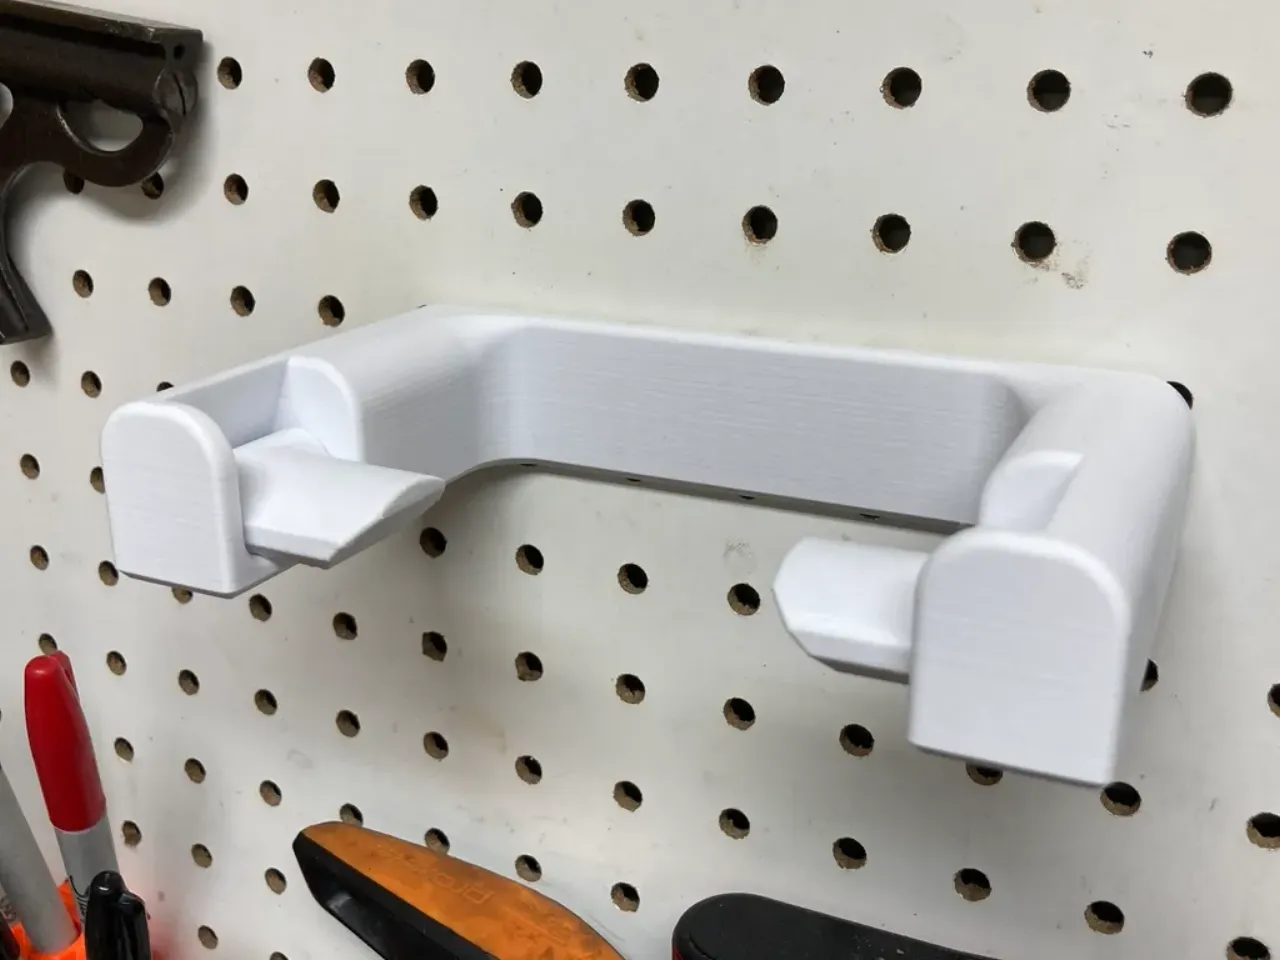 Toilet paper roll holder for pegboard by cmh